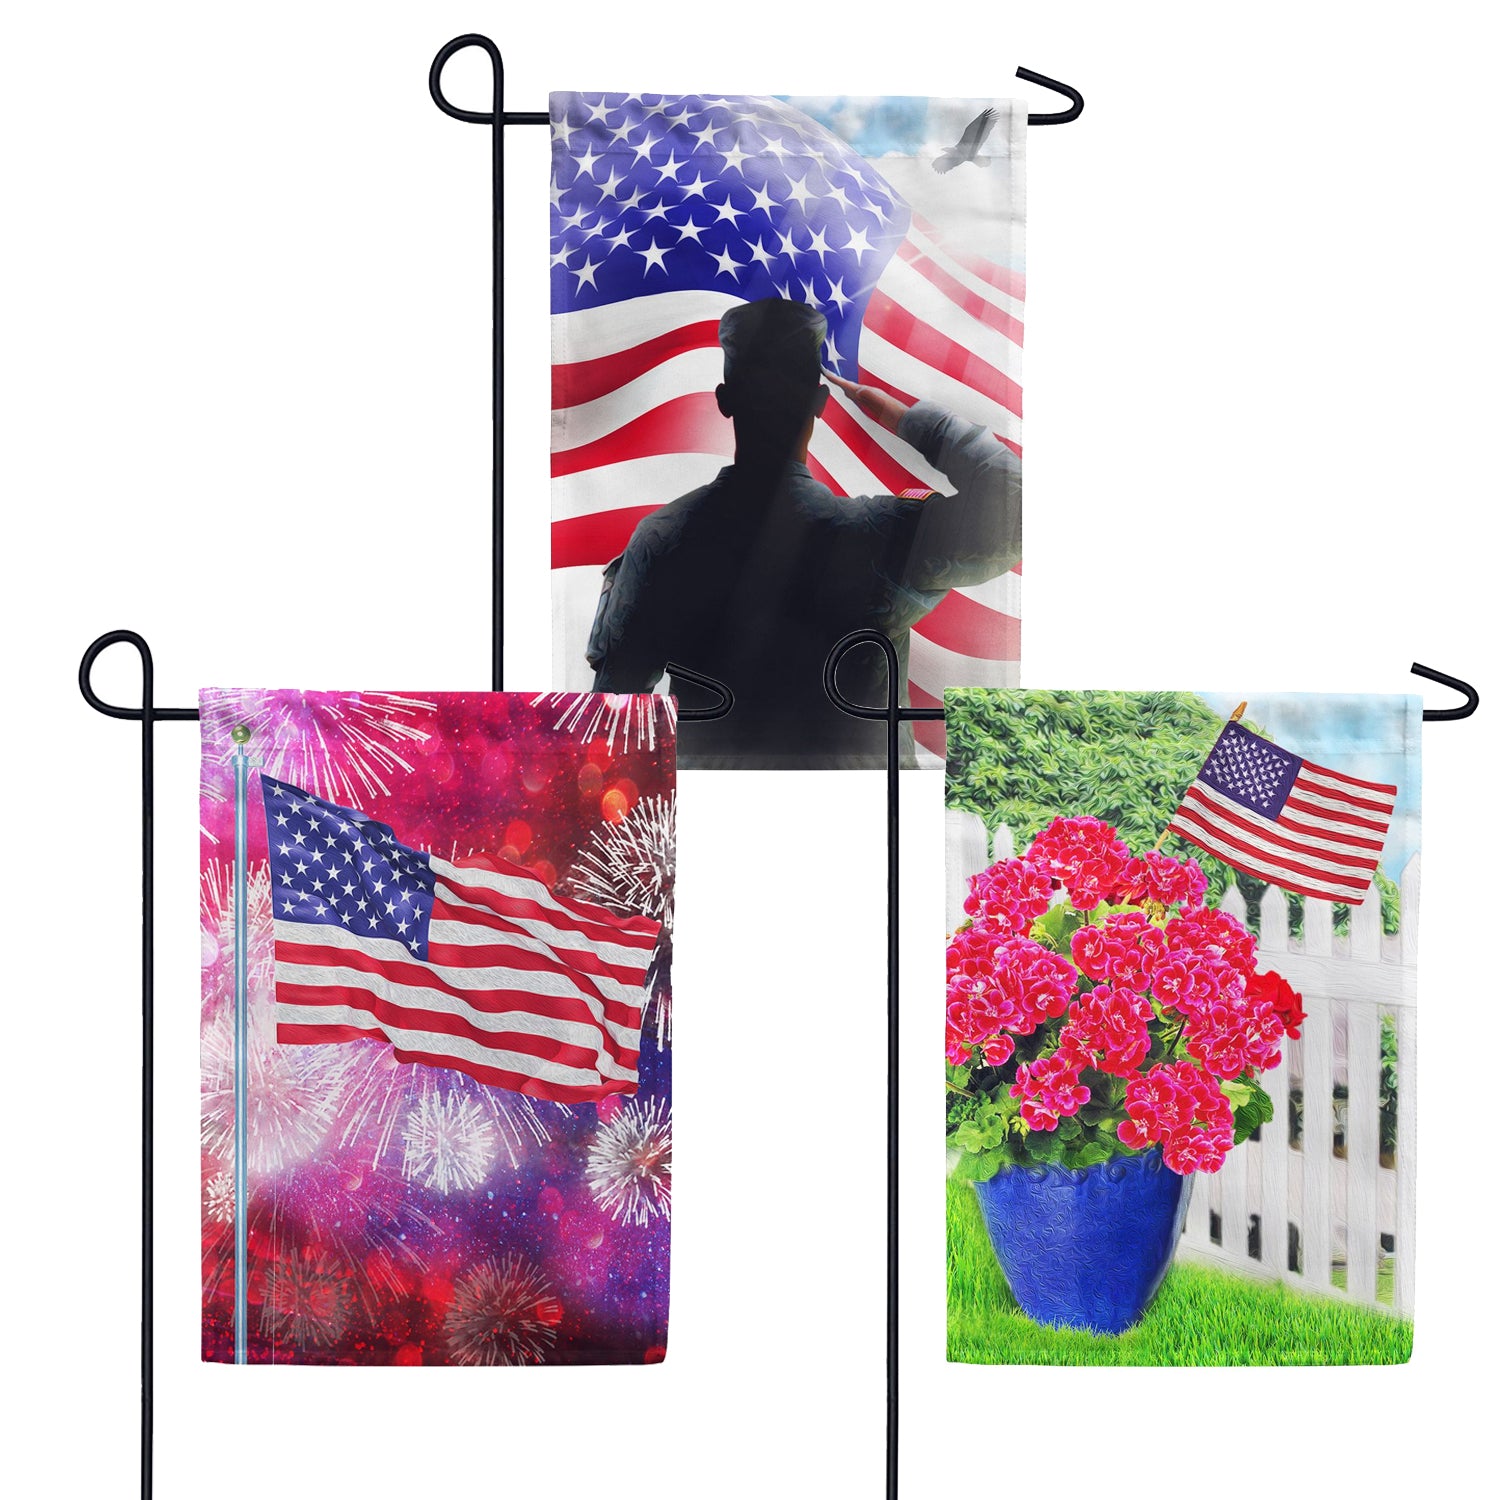 Build Your Own Patriotic Garden Flags Bundle (Buy 3 Flags for just $22.99)